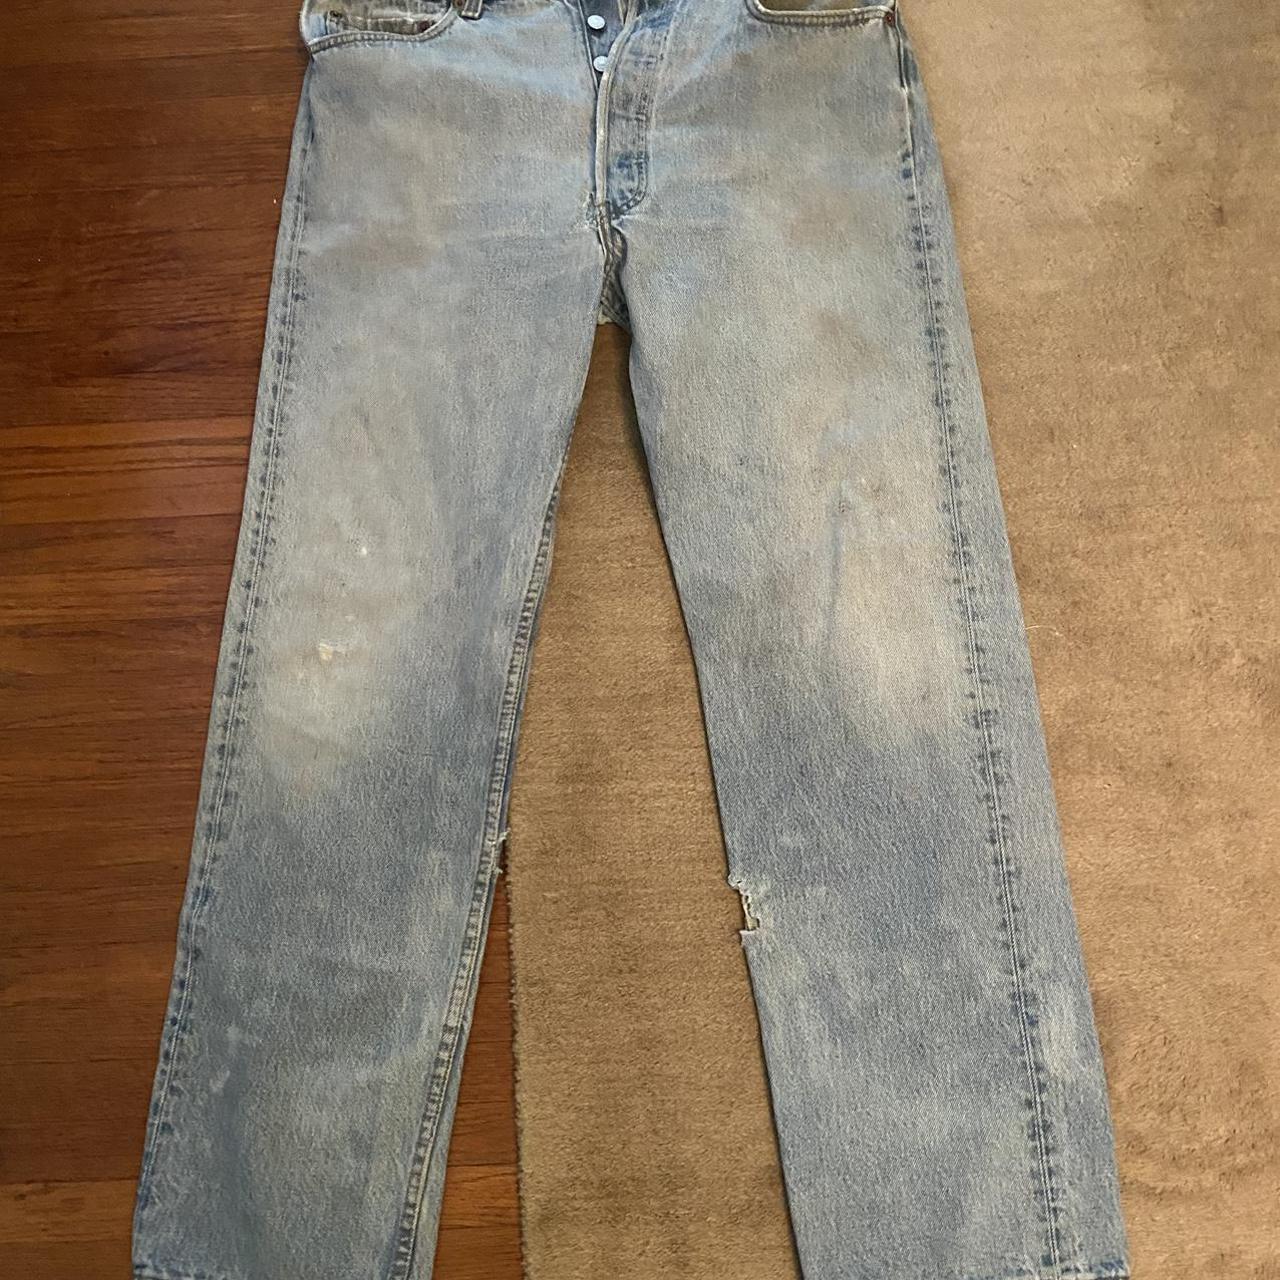 Vintage Levi’s 501s jeans beautiful wash and fade... - Depop